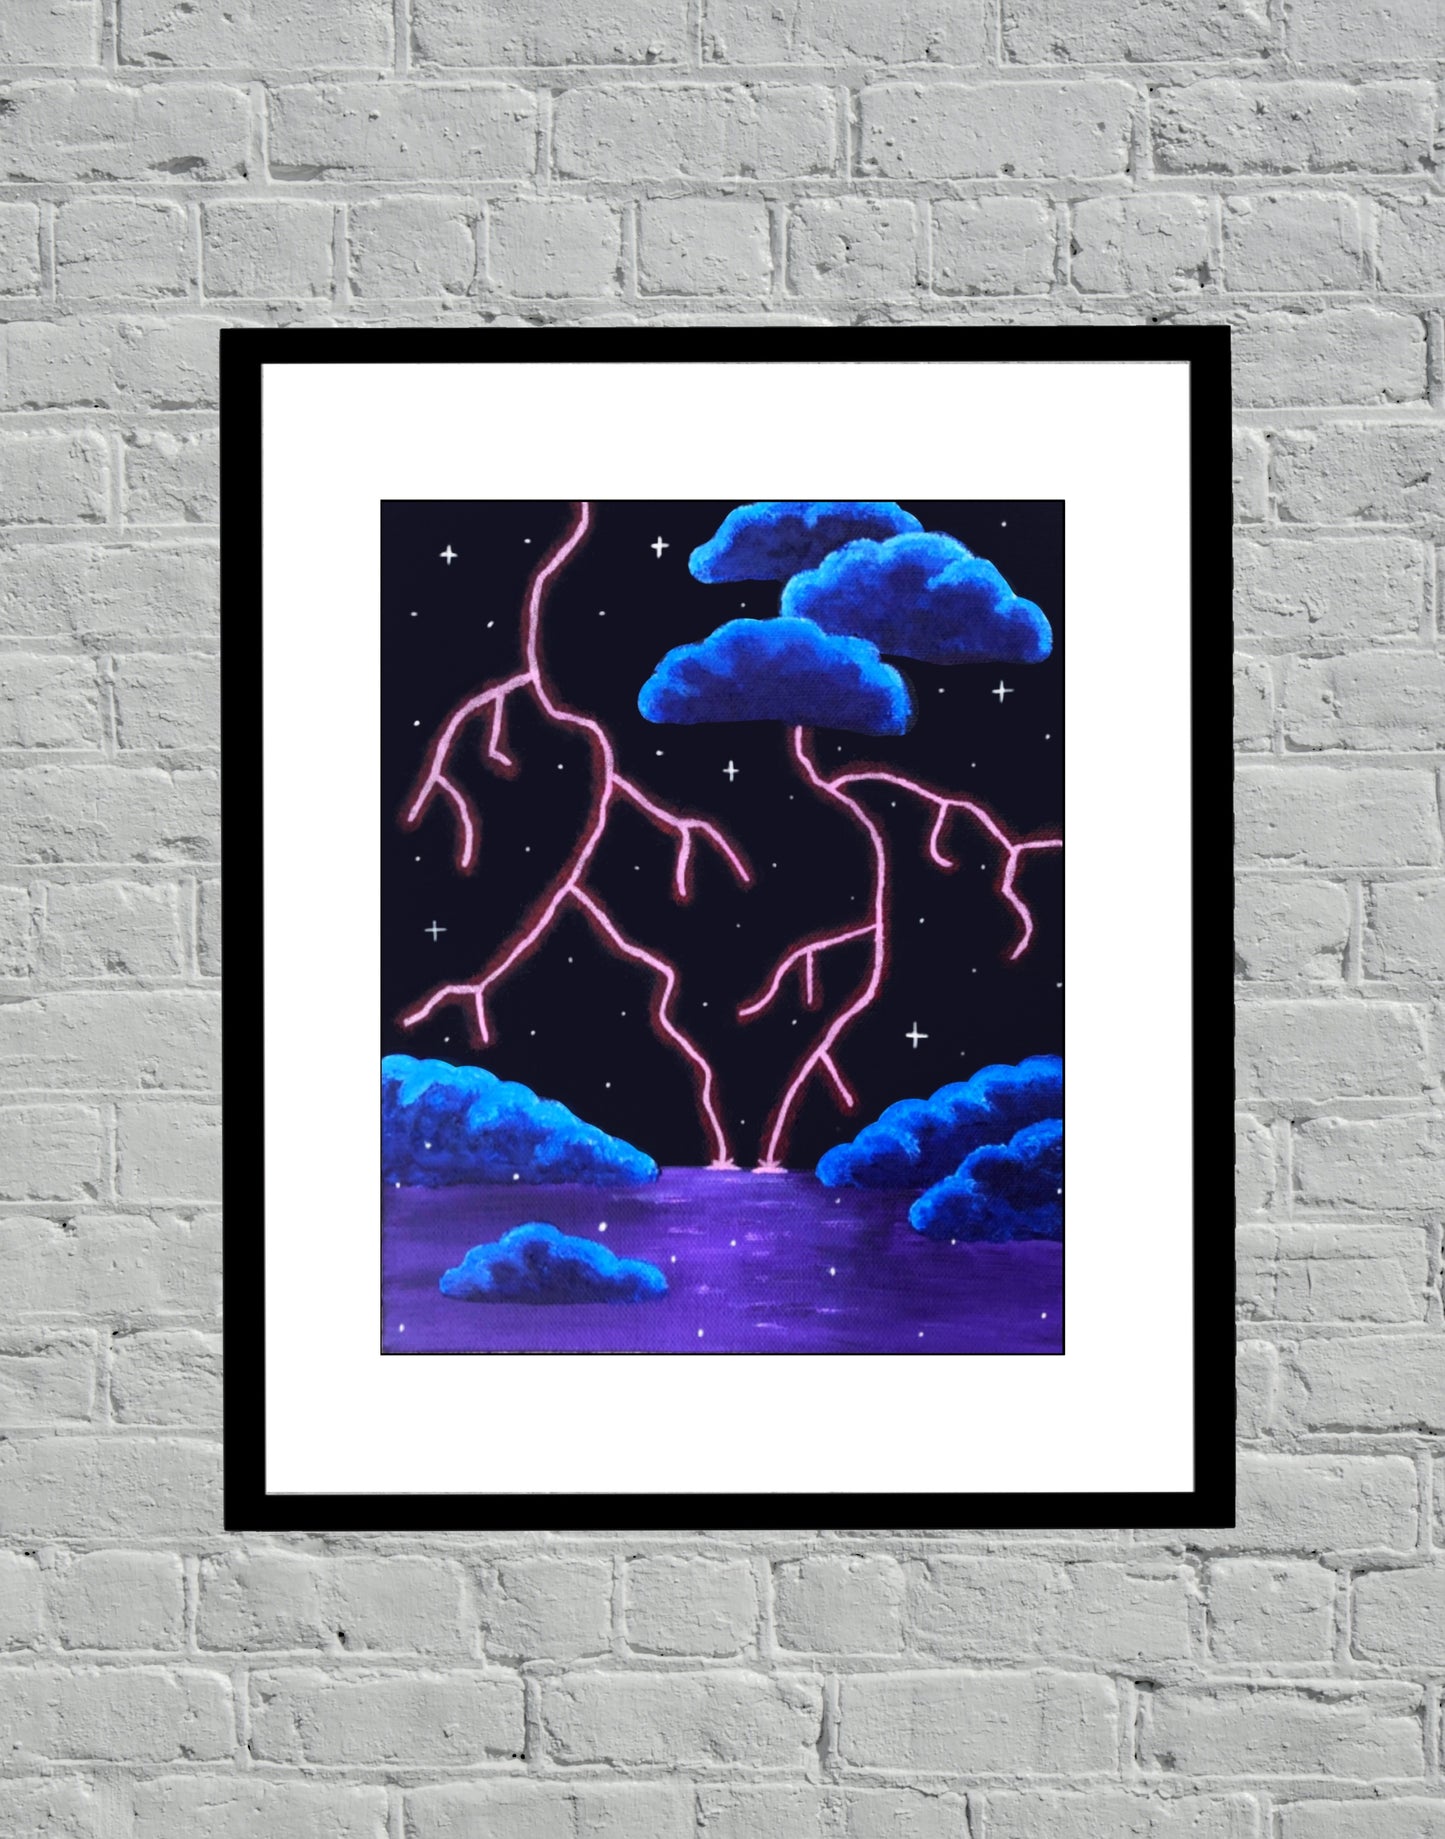 Lightning Bolts in Clouds Acrylic Paint Art Print